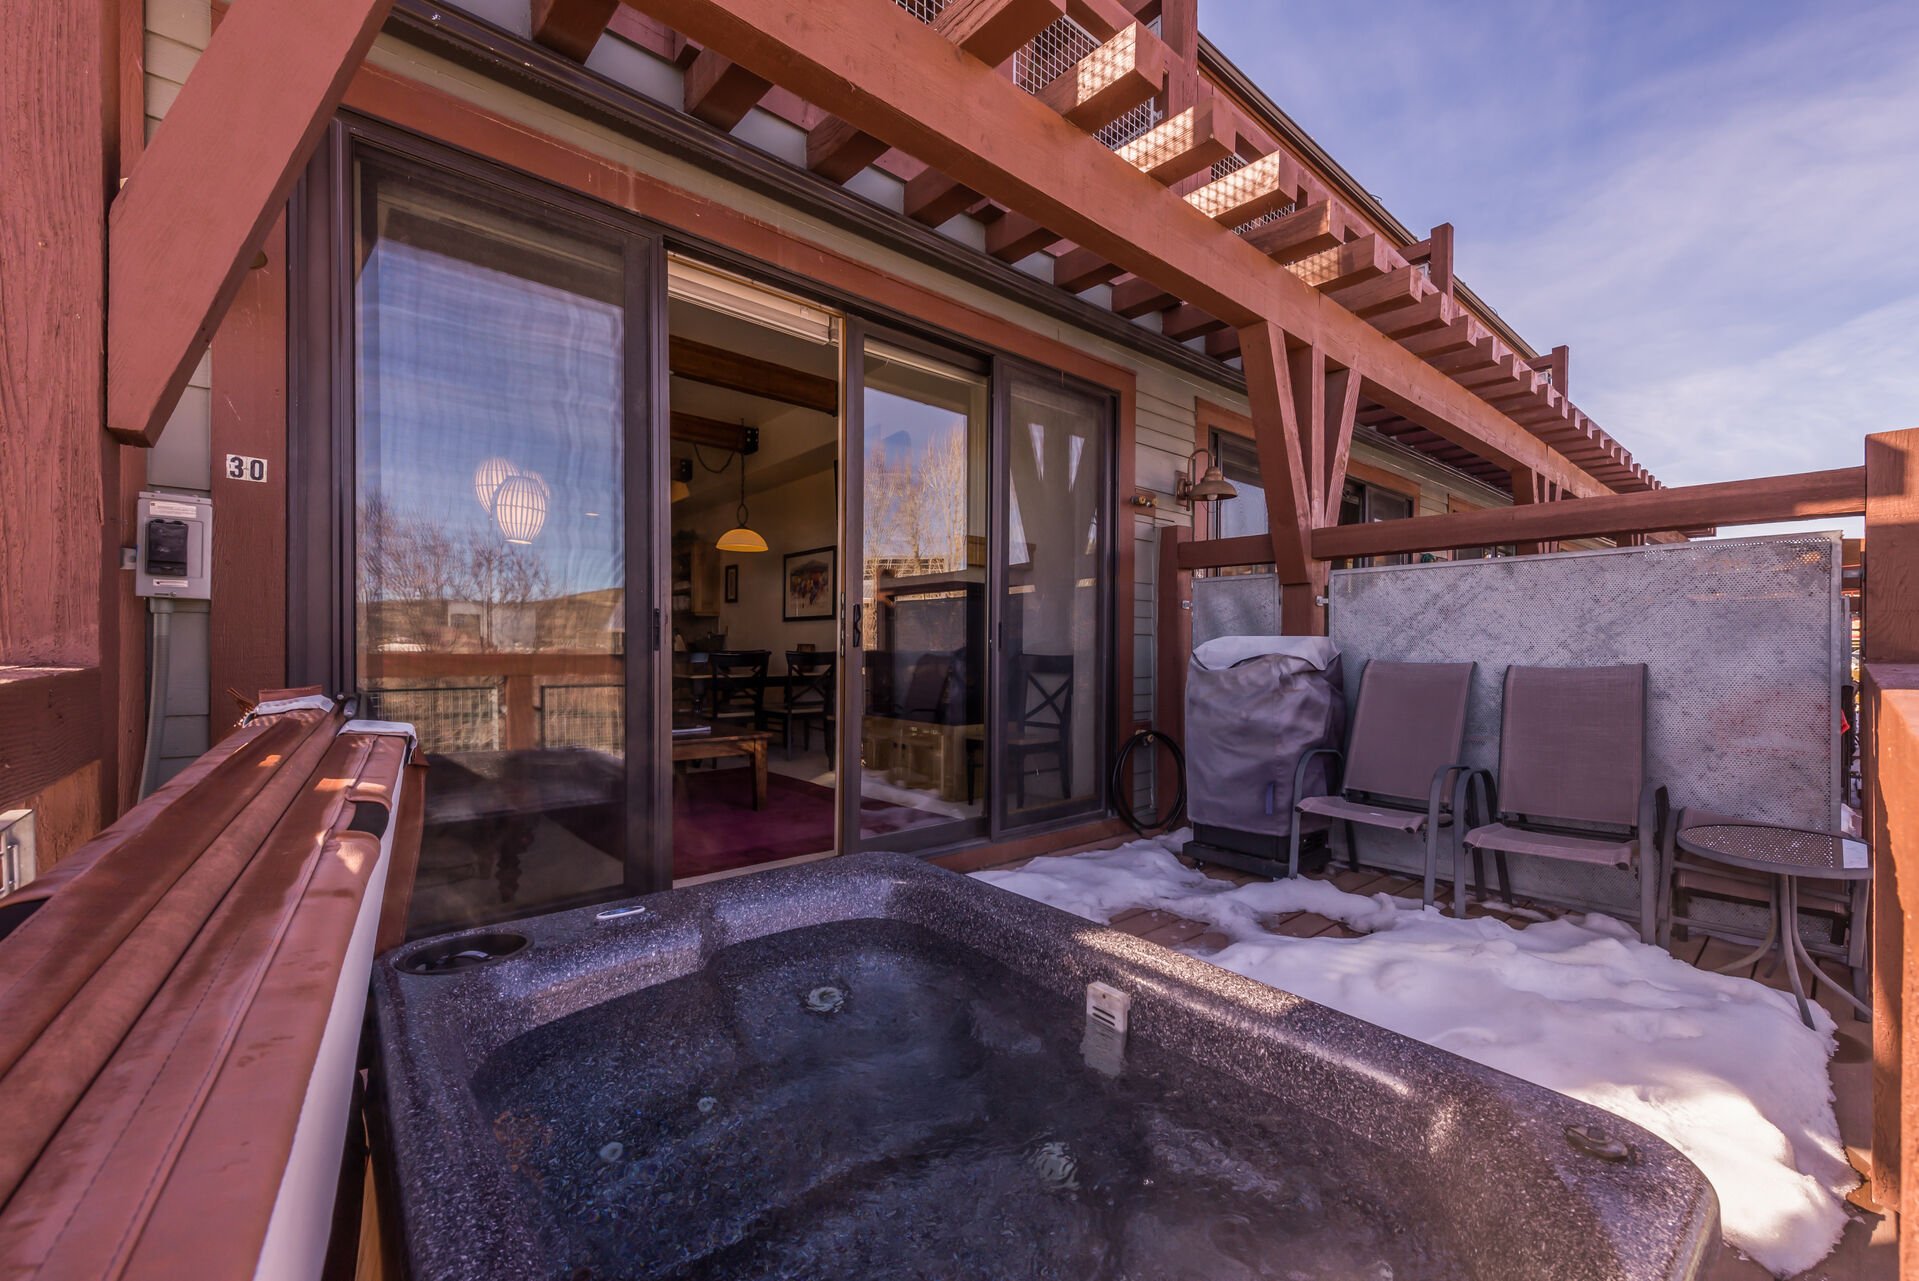 Lower Deck with Hot Tub, Patio Seating and BBQ